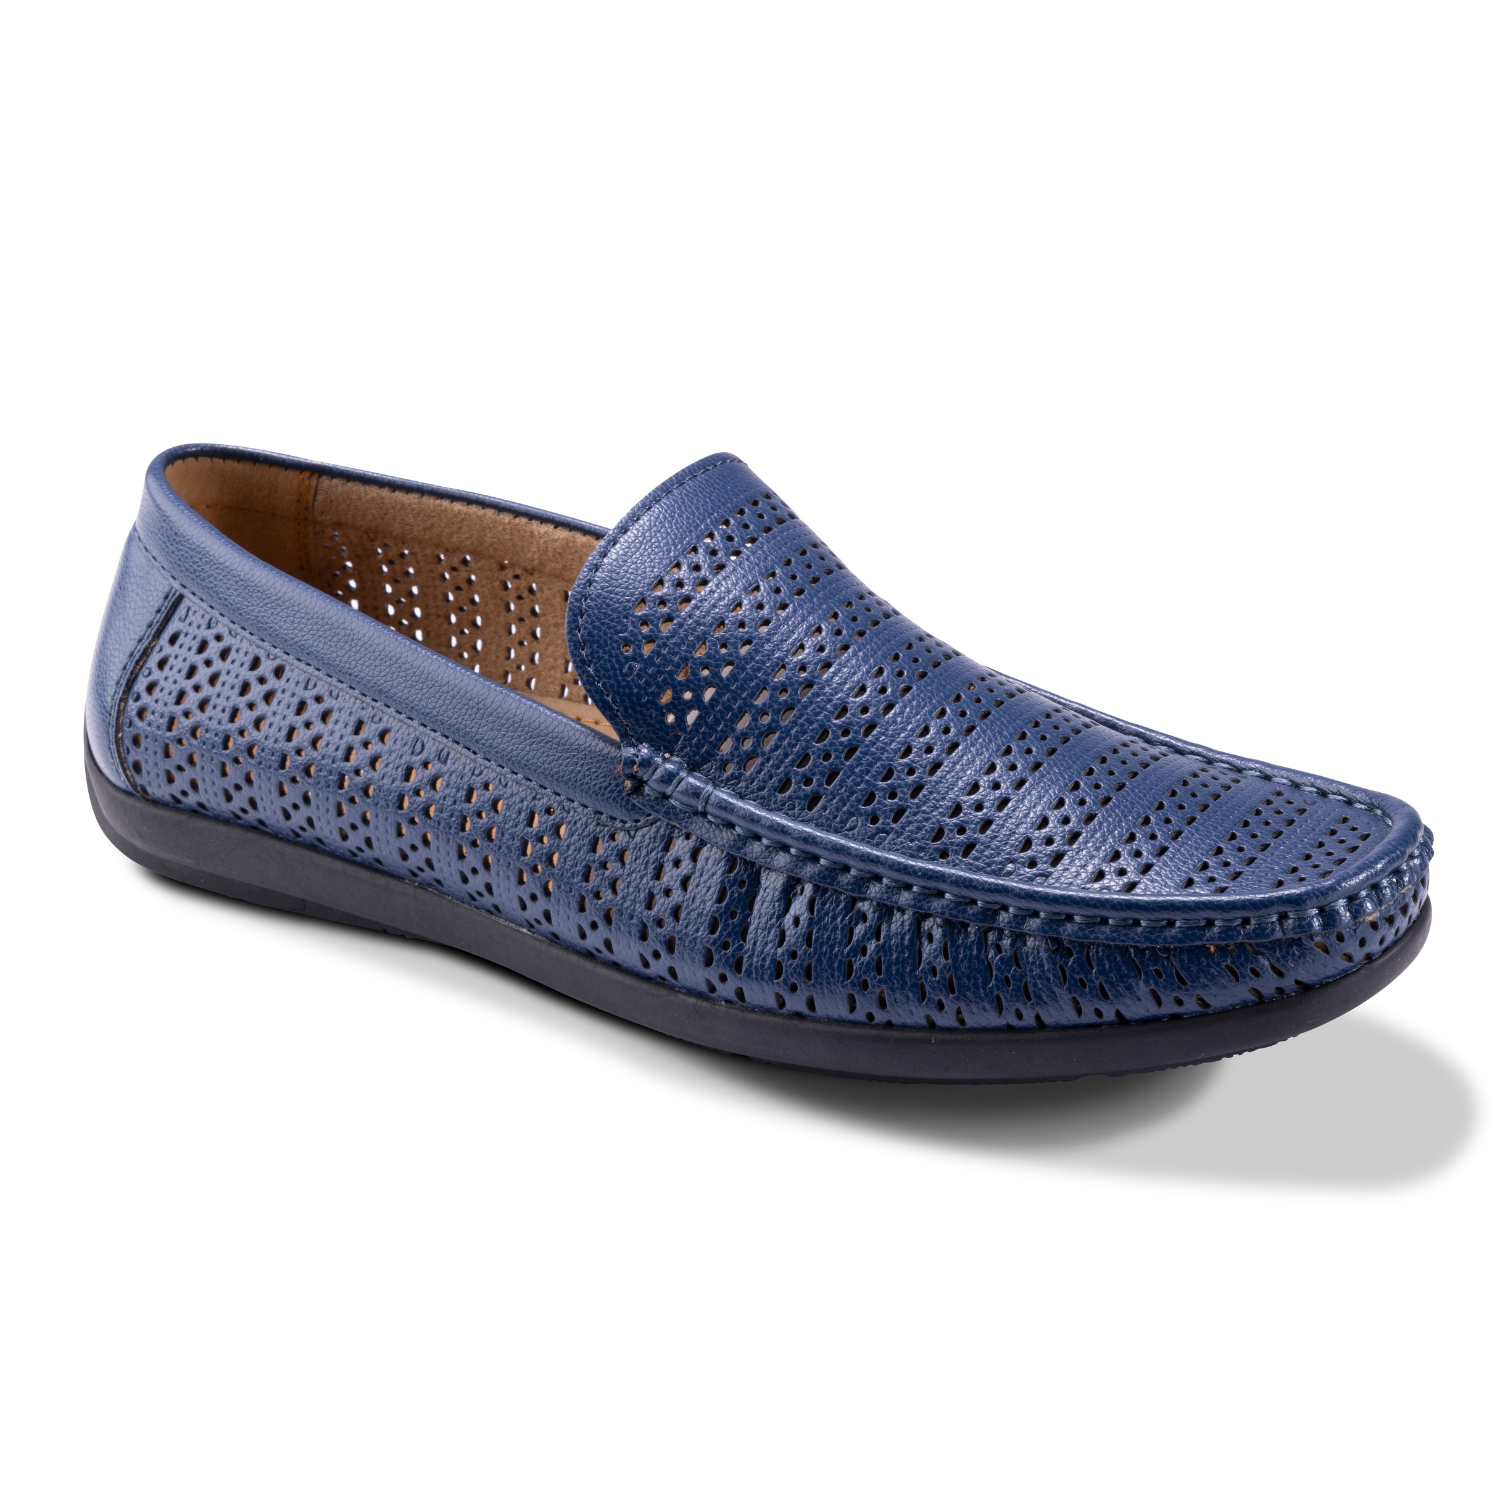 Men's Perforated Driving Moccasin/Loafers Shoes